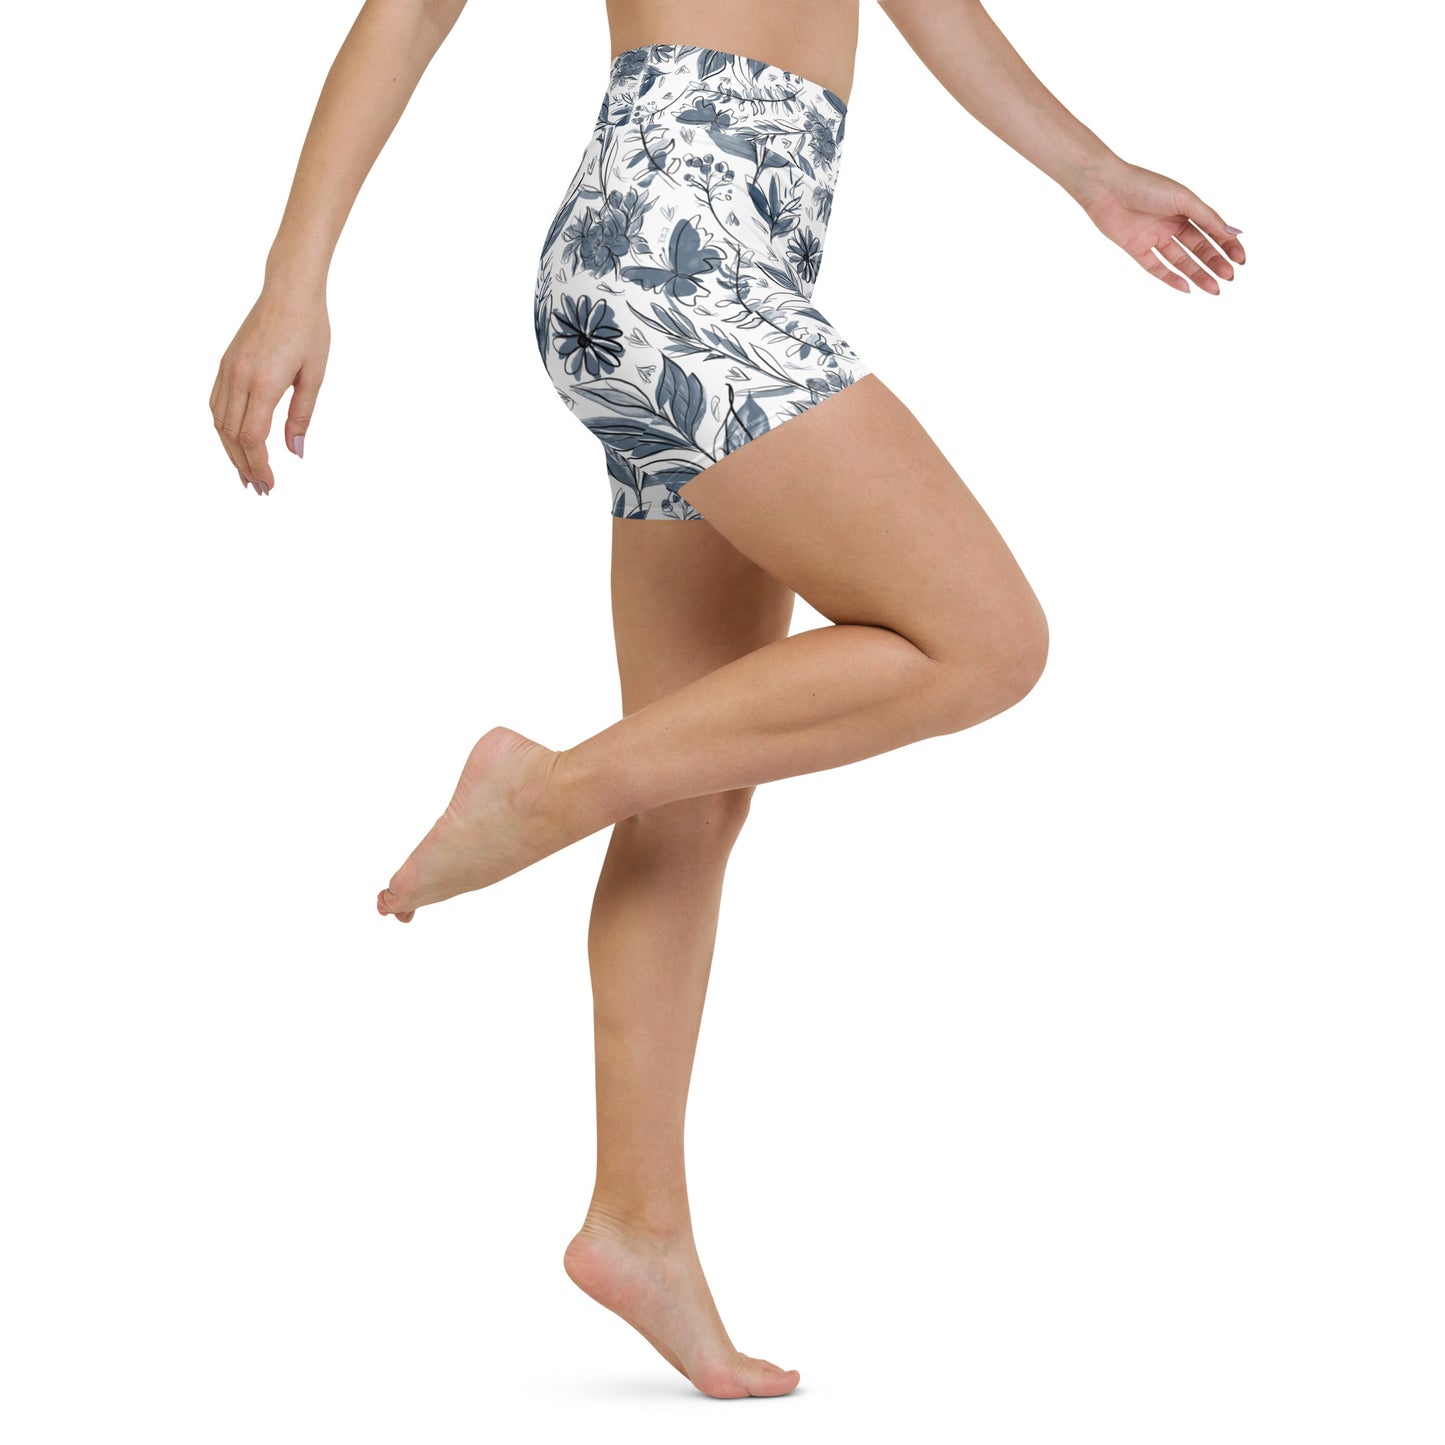 Watercolor White Yoga Shorts. Houston Collection. Design hand-painted by the Designer Maria Alejandra Echenique